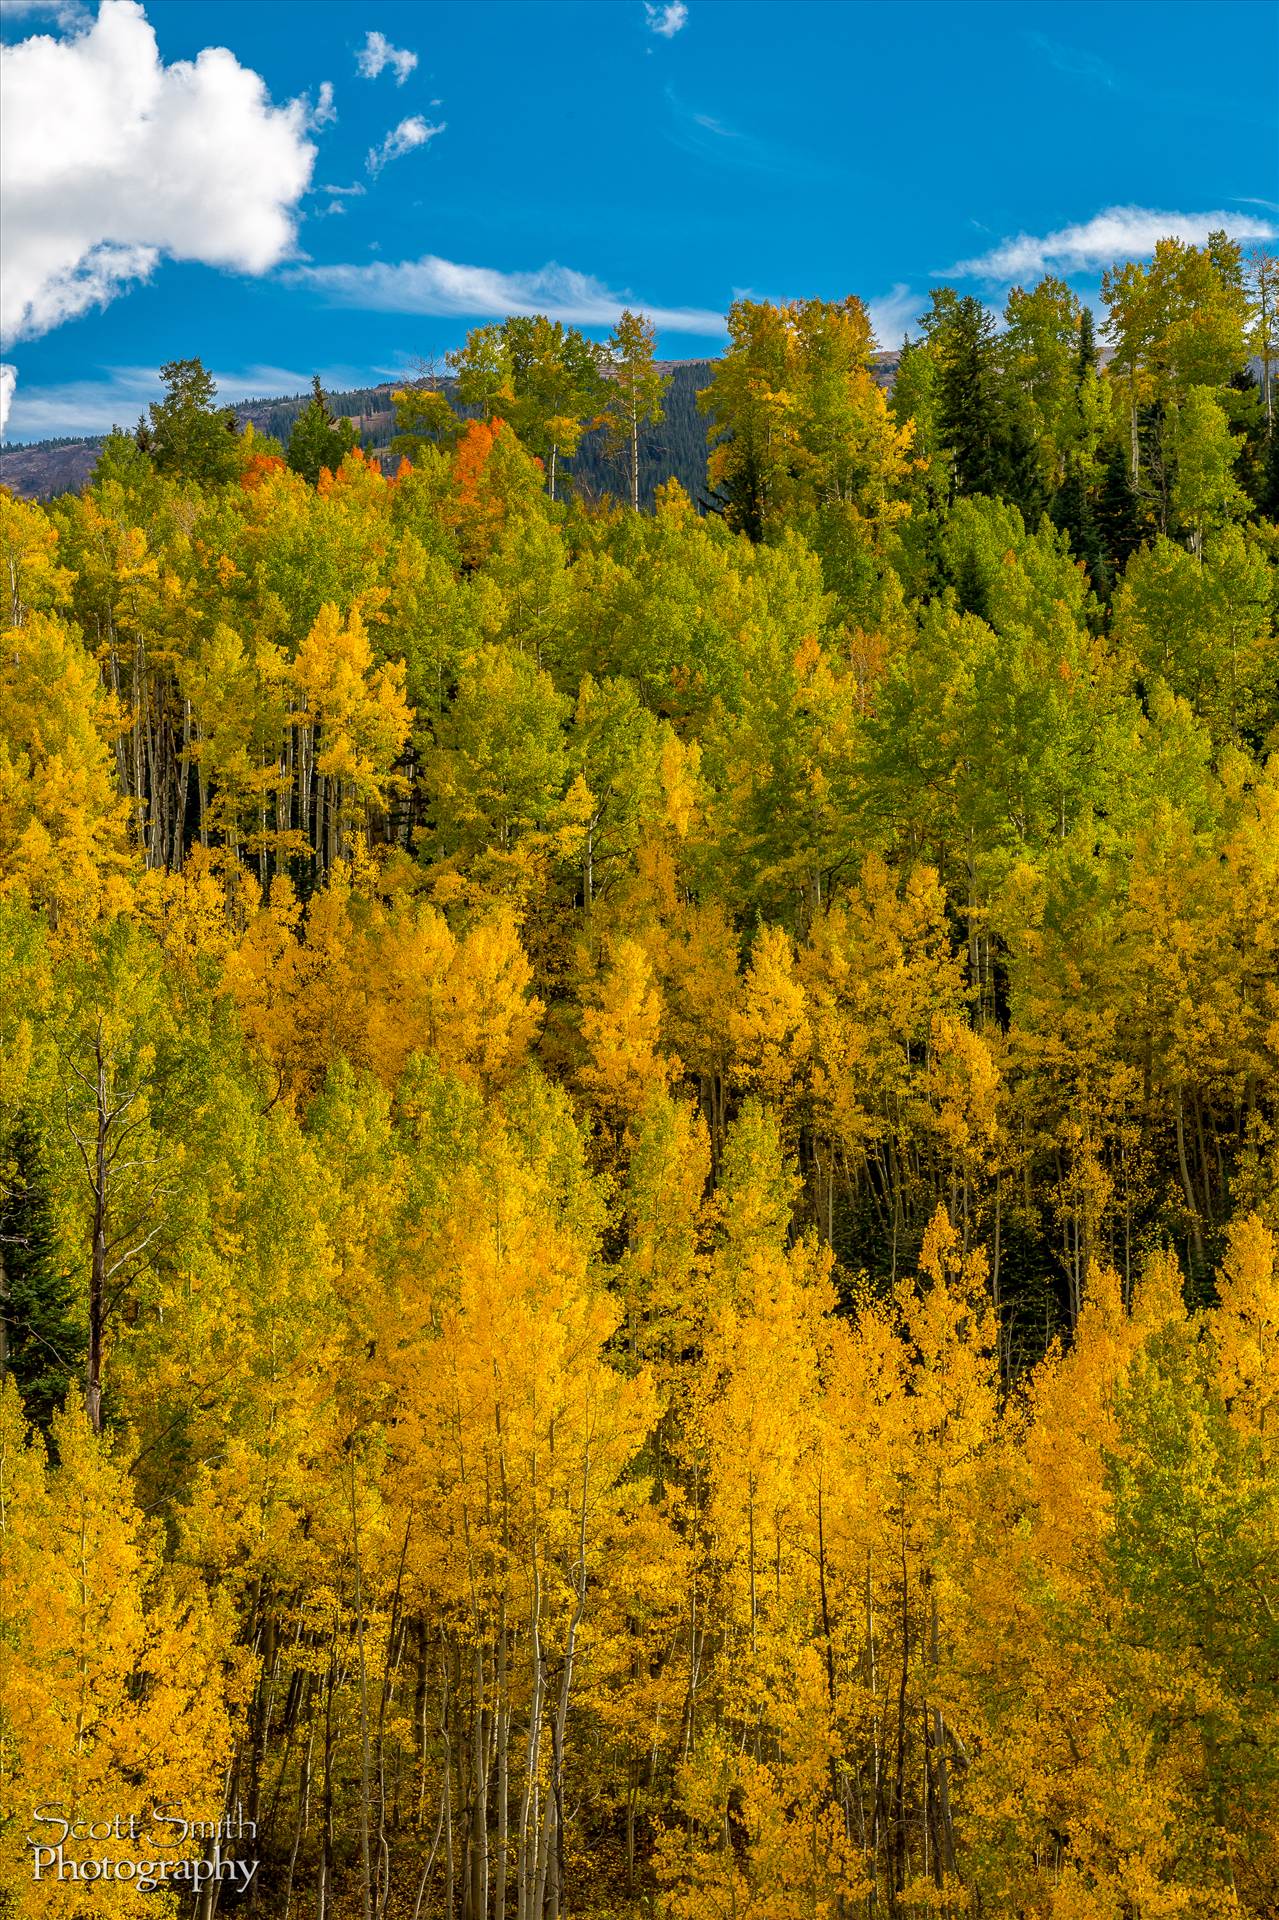 Snowmass Wilderness Area Fall Colors Fall colors in Colorado, just outside of Snowmass Village by Scott Smith Photos